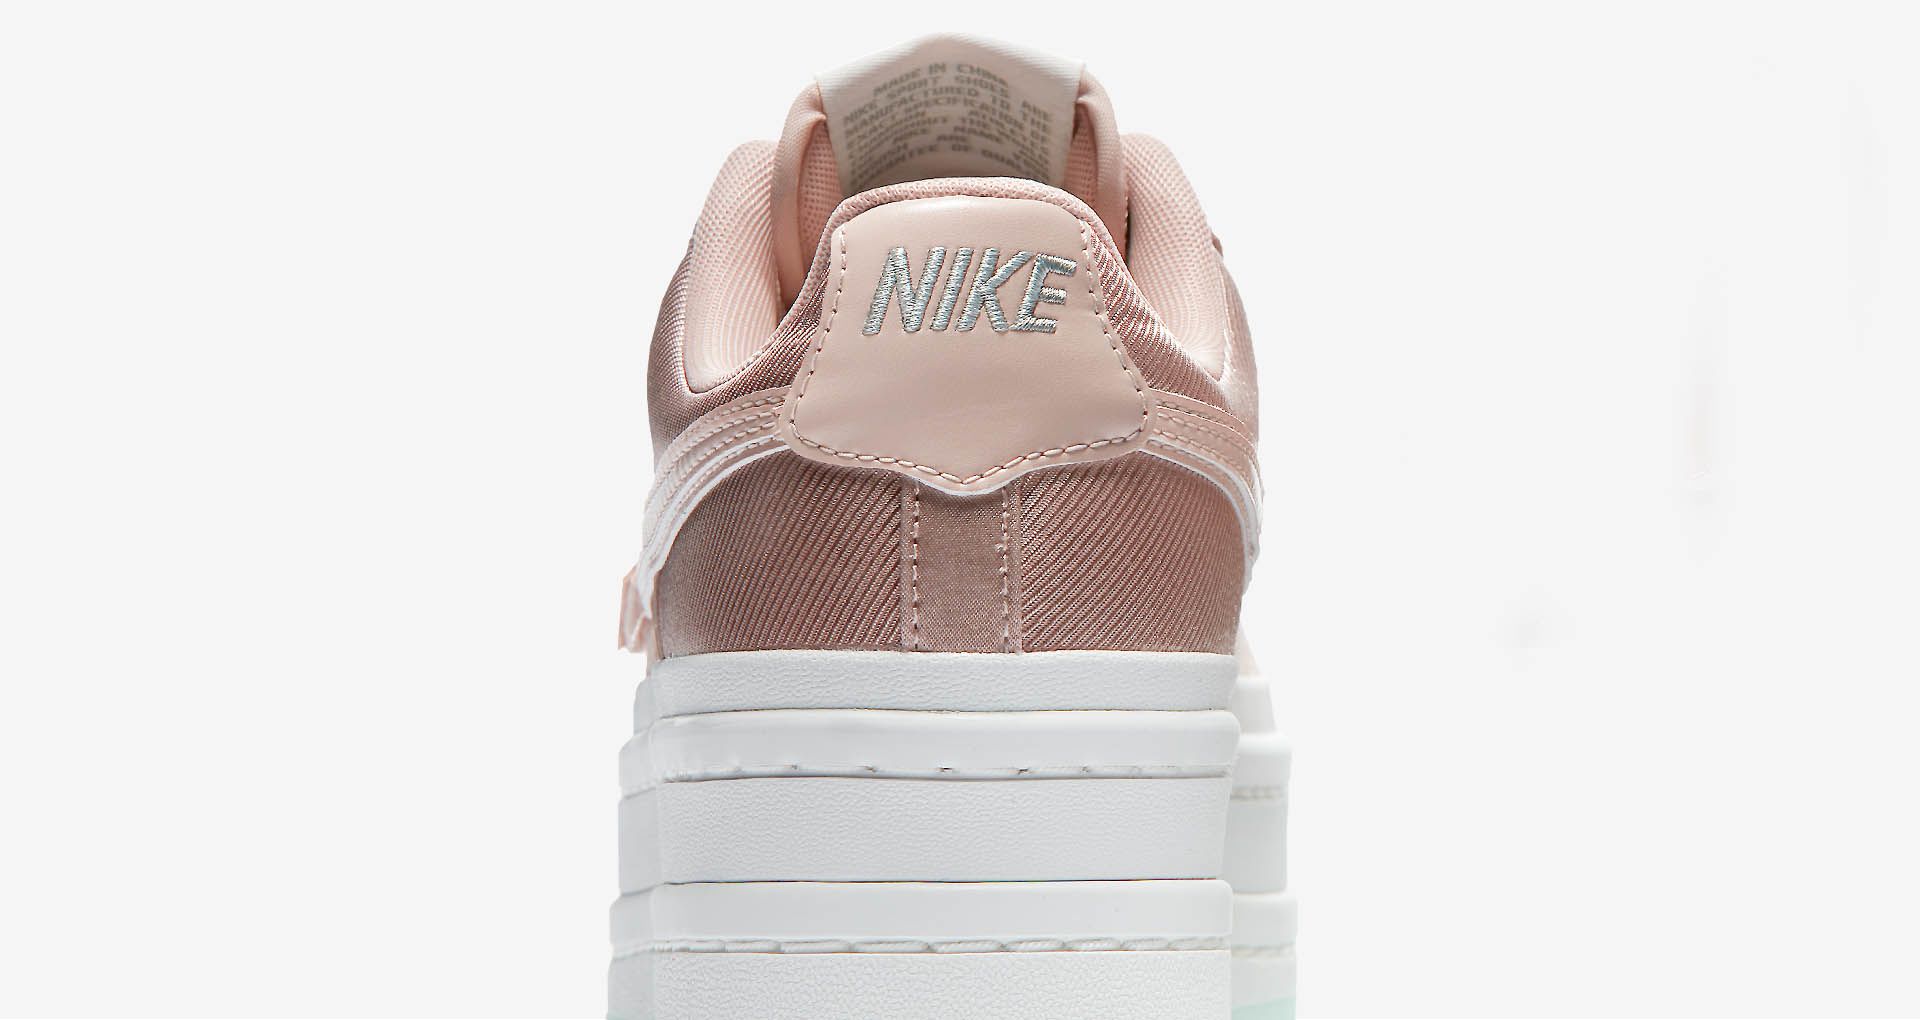 Nike Women's Vandal 2K 'Particle Beige and Summit White' Release Date ...